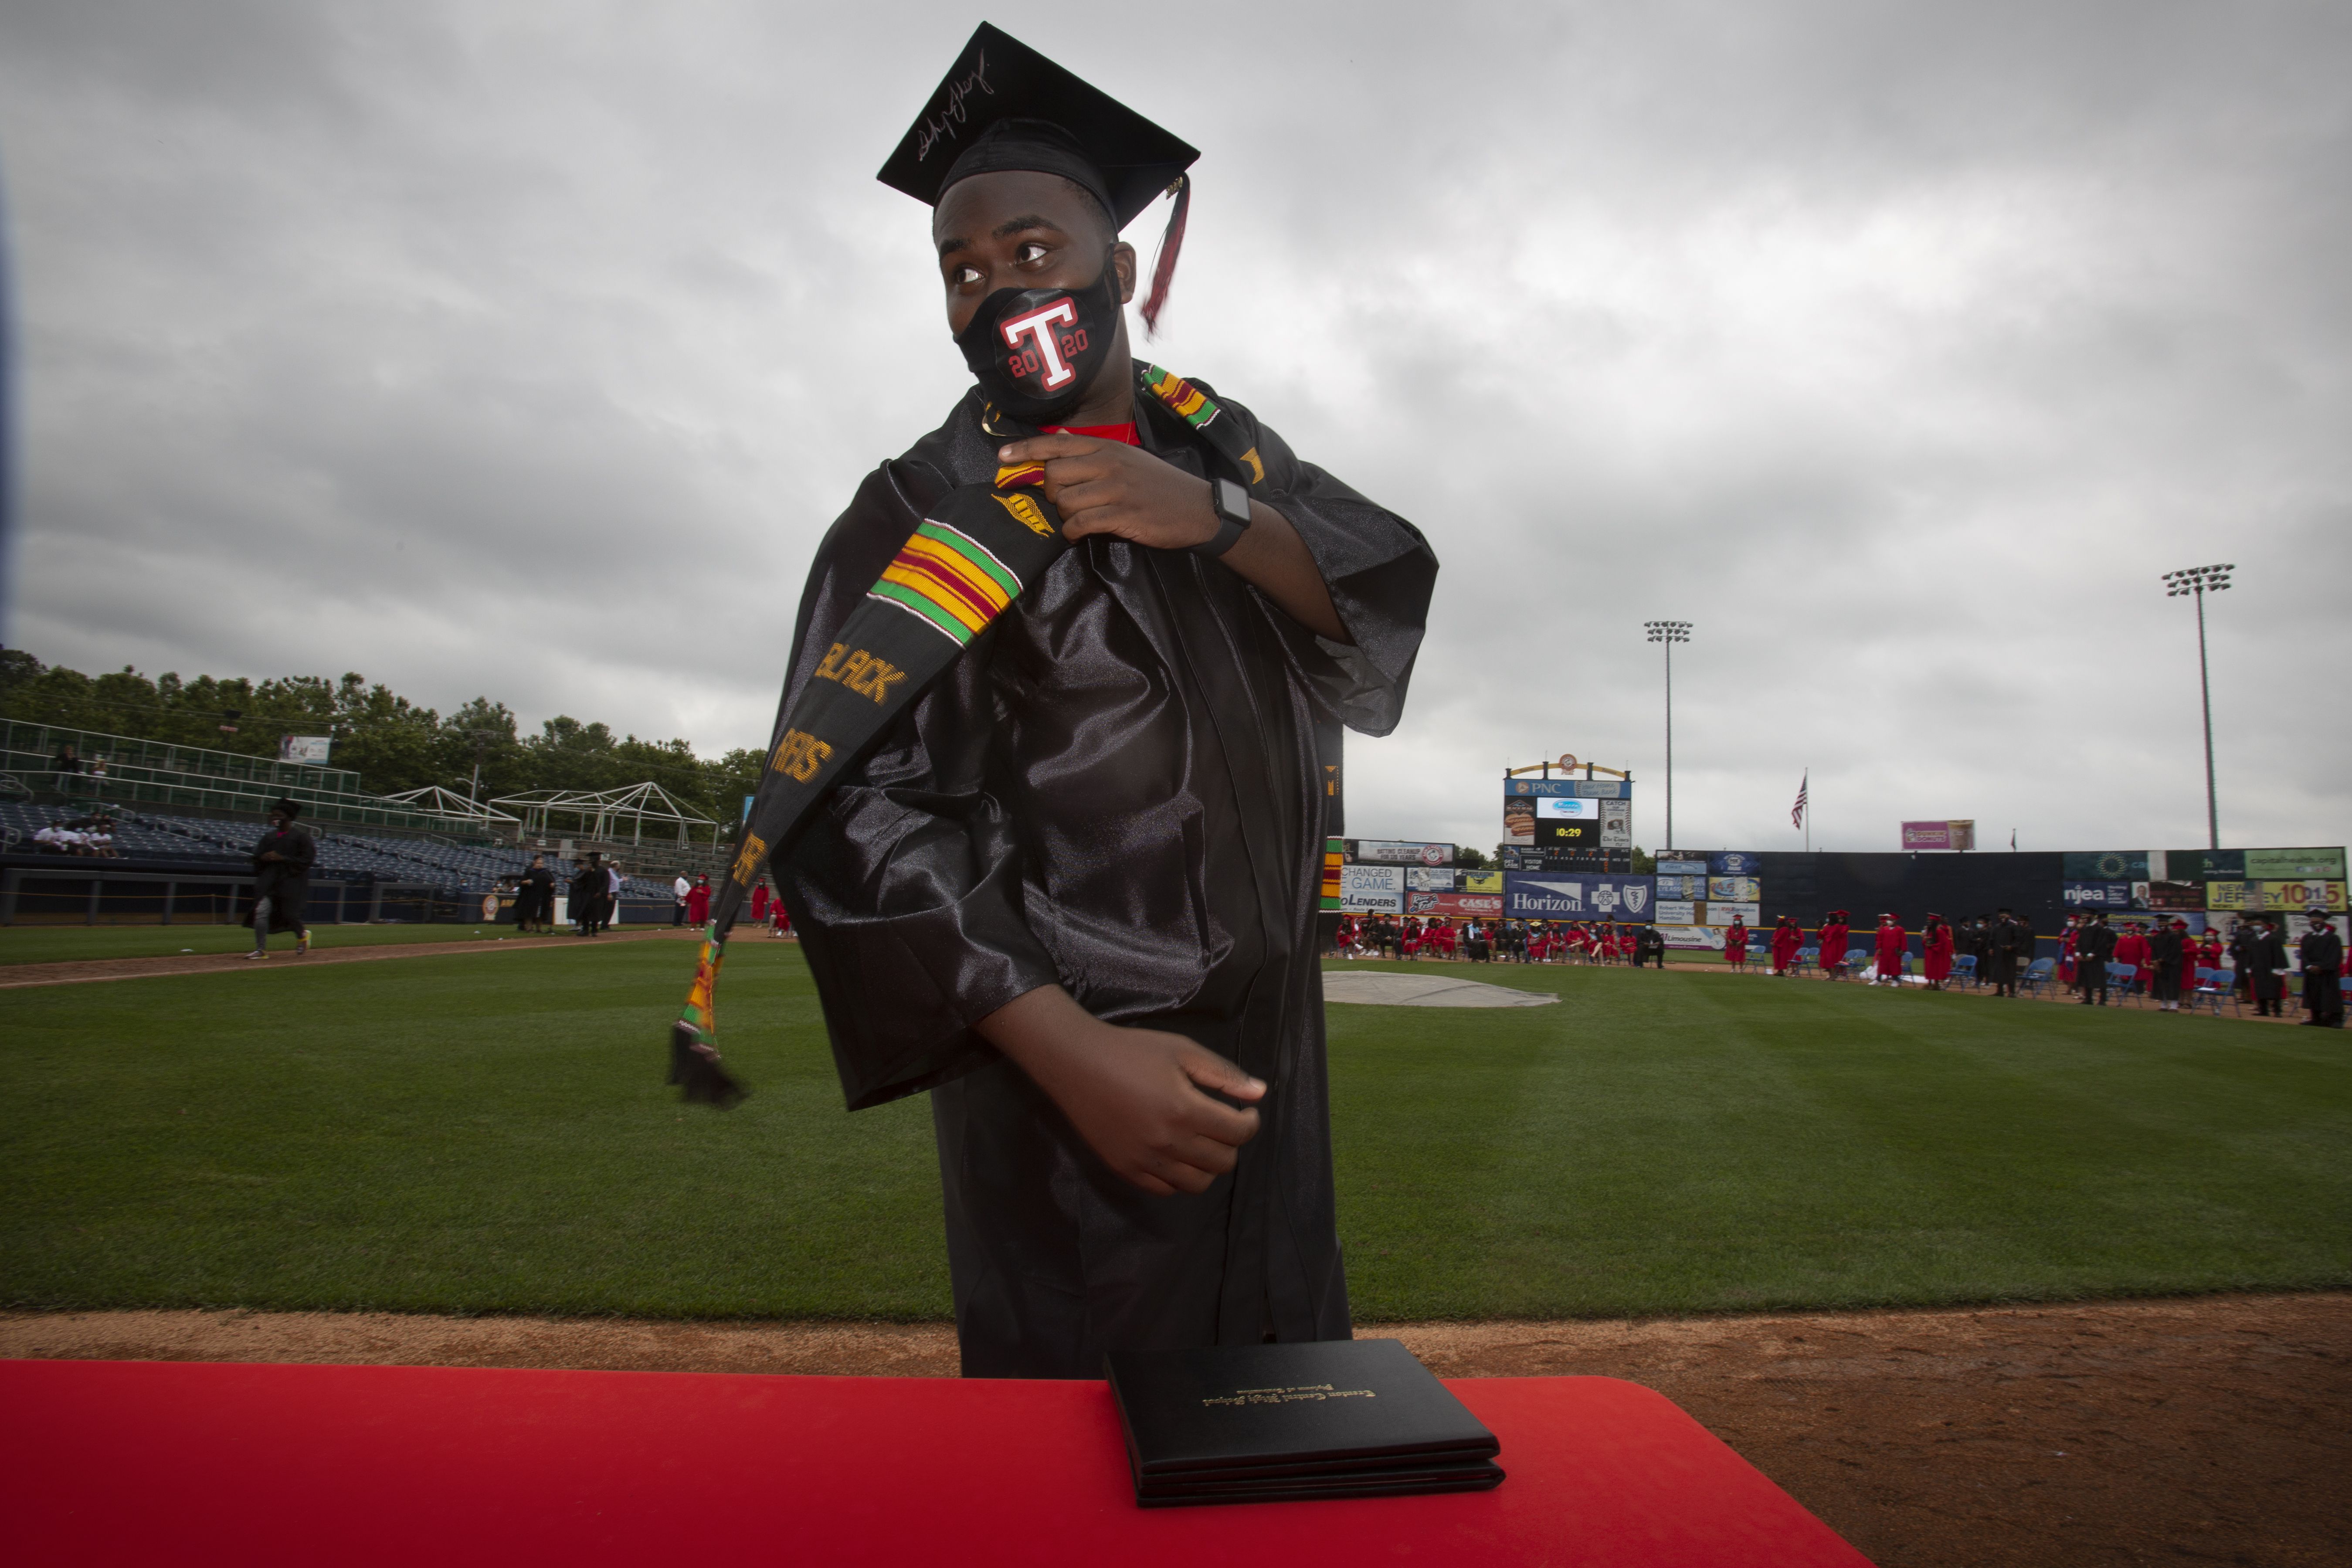 Graduation in a Baseball Stadium? College Commencements Pair Pomp